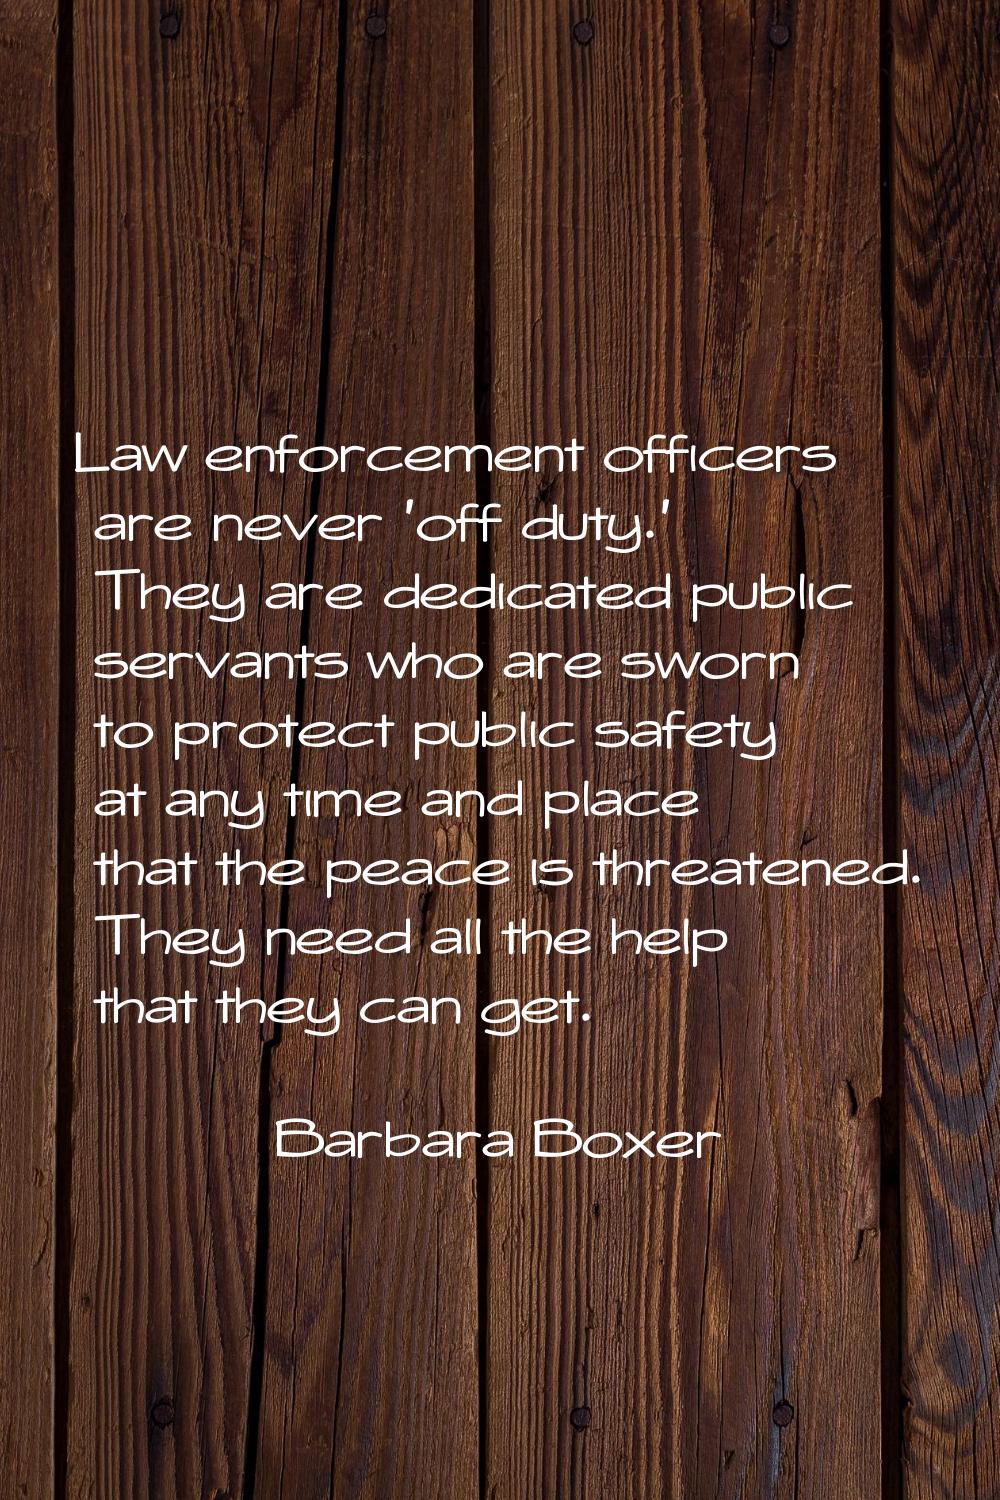 Law enforcement officers are never 'off duty.' They are dedicated public servants who are sworn to 